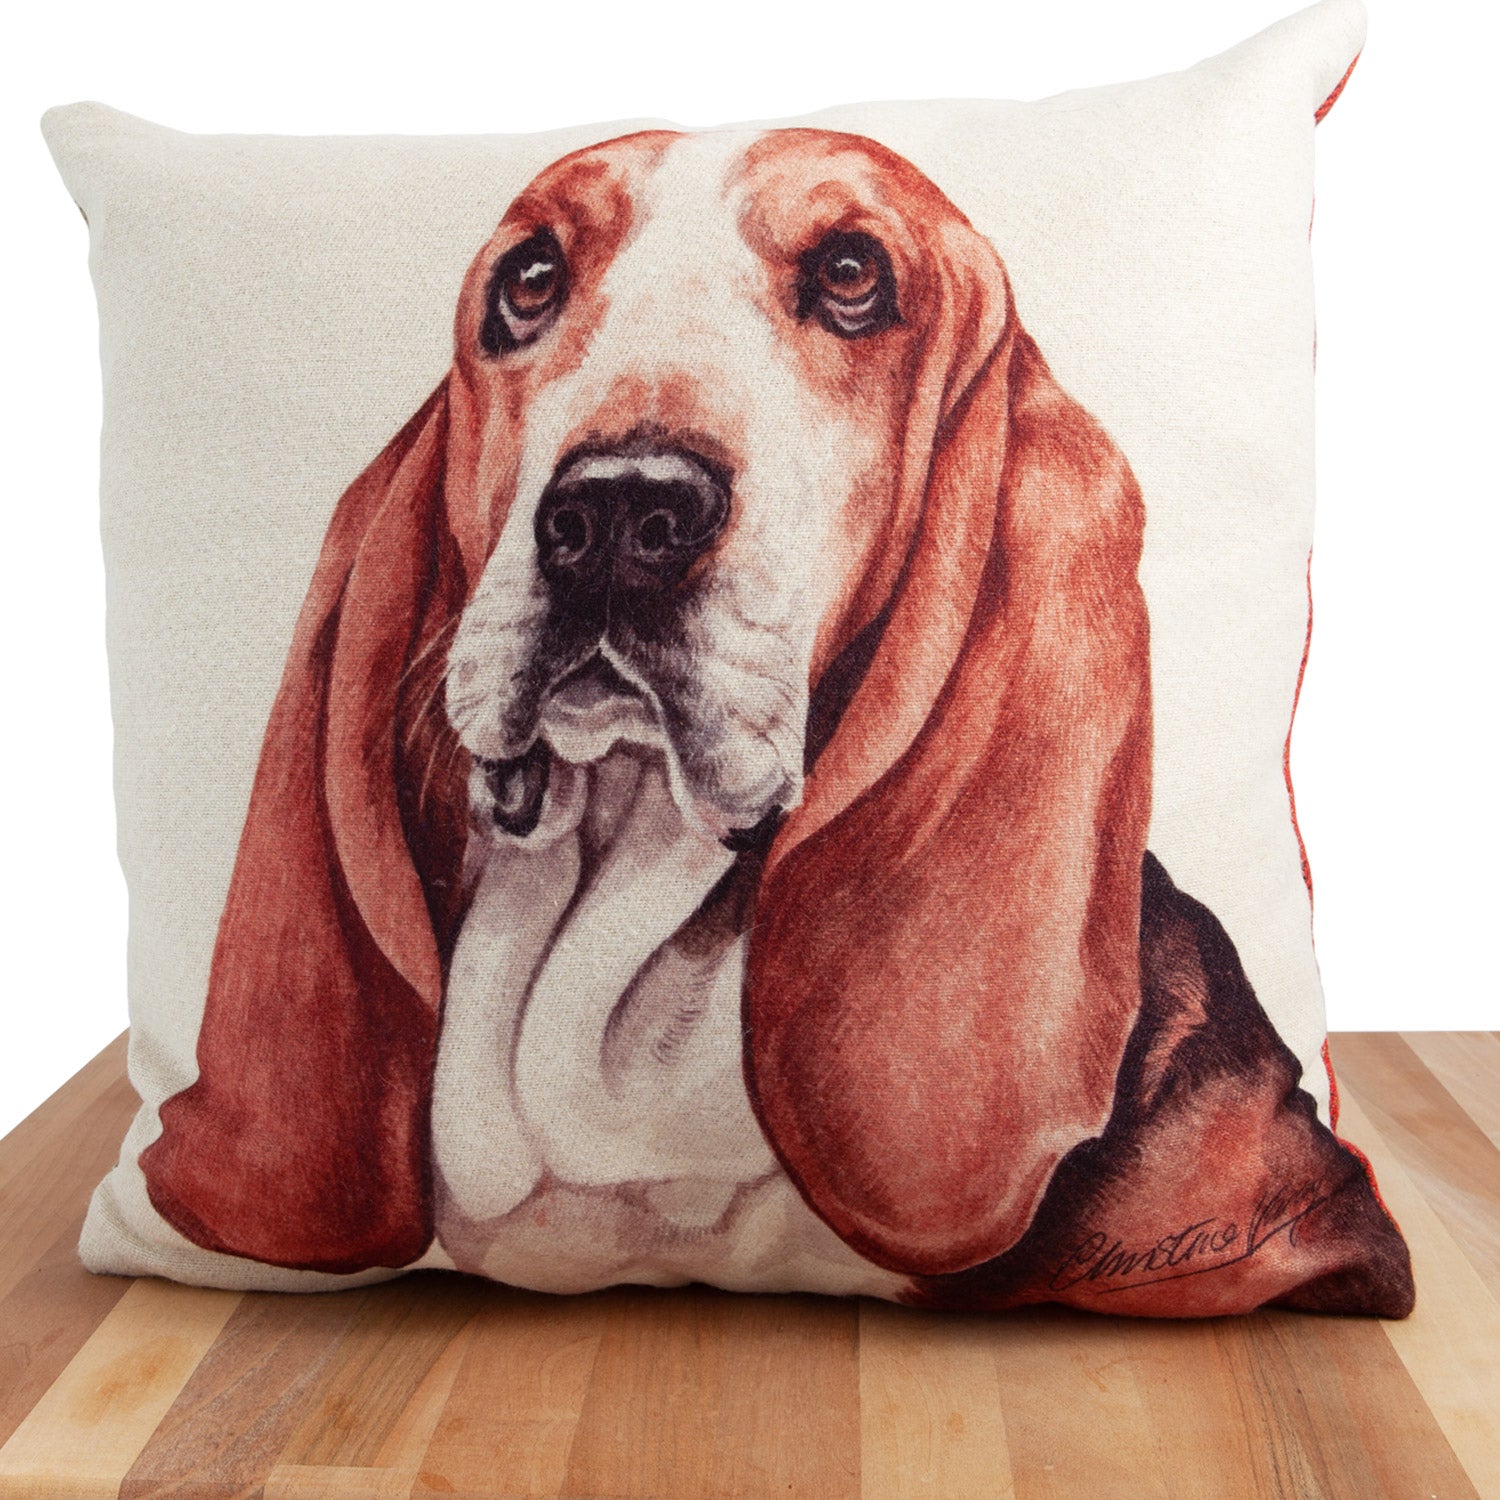 Dog Lover Gifts available at Dog Krazy Gifts. Basset Hound Cushion, part of our Christine Varley collection – available at www.dogkrazygifts.co.uk